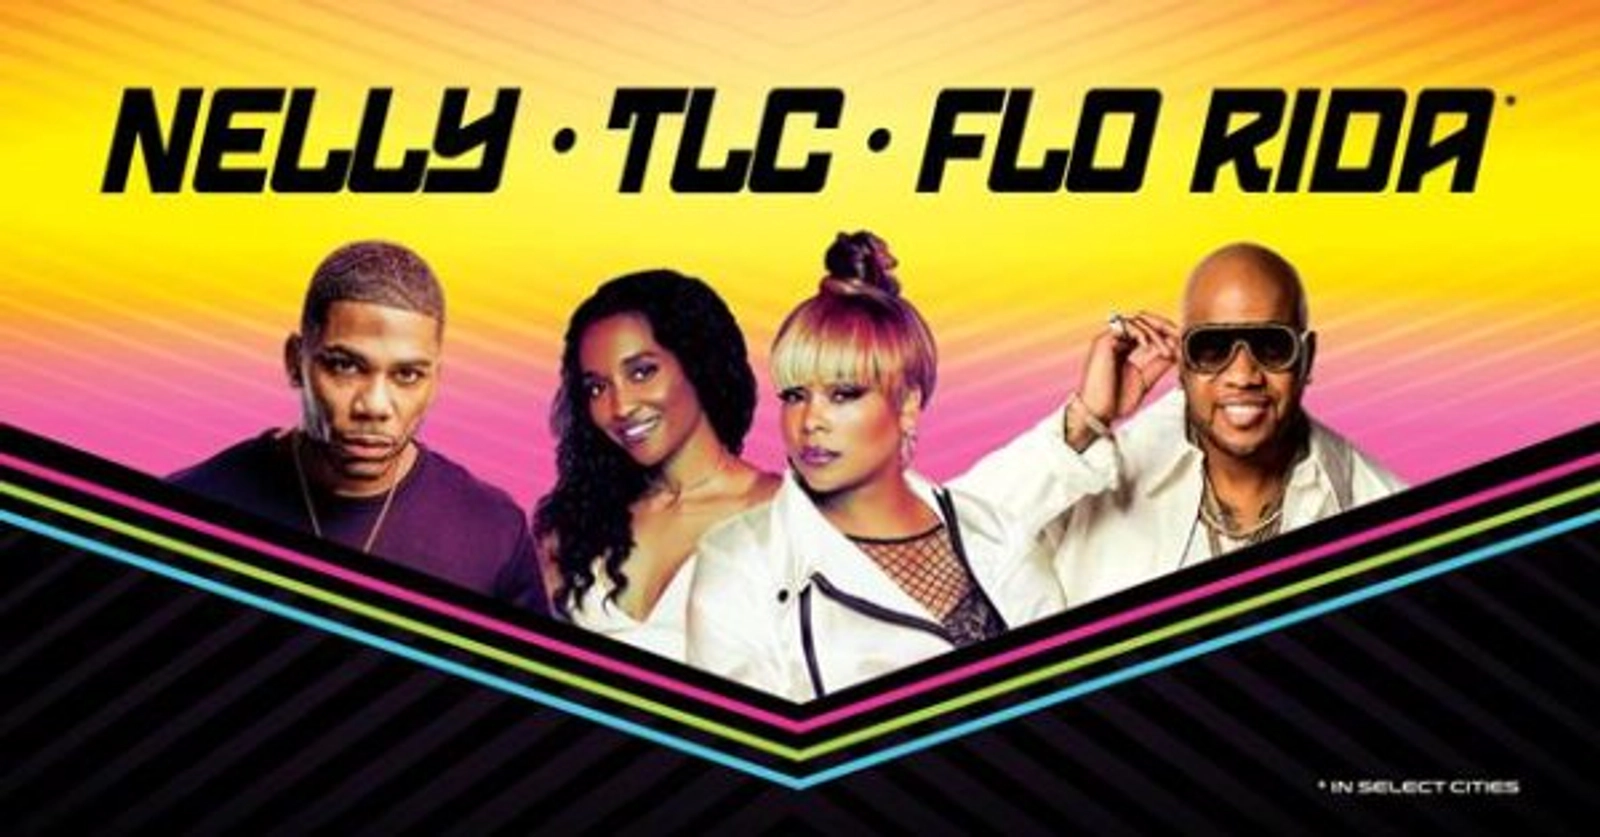 Win Nelly, TLC, and Flo Rida Tickets! - Thumbnail Image